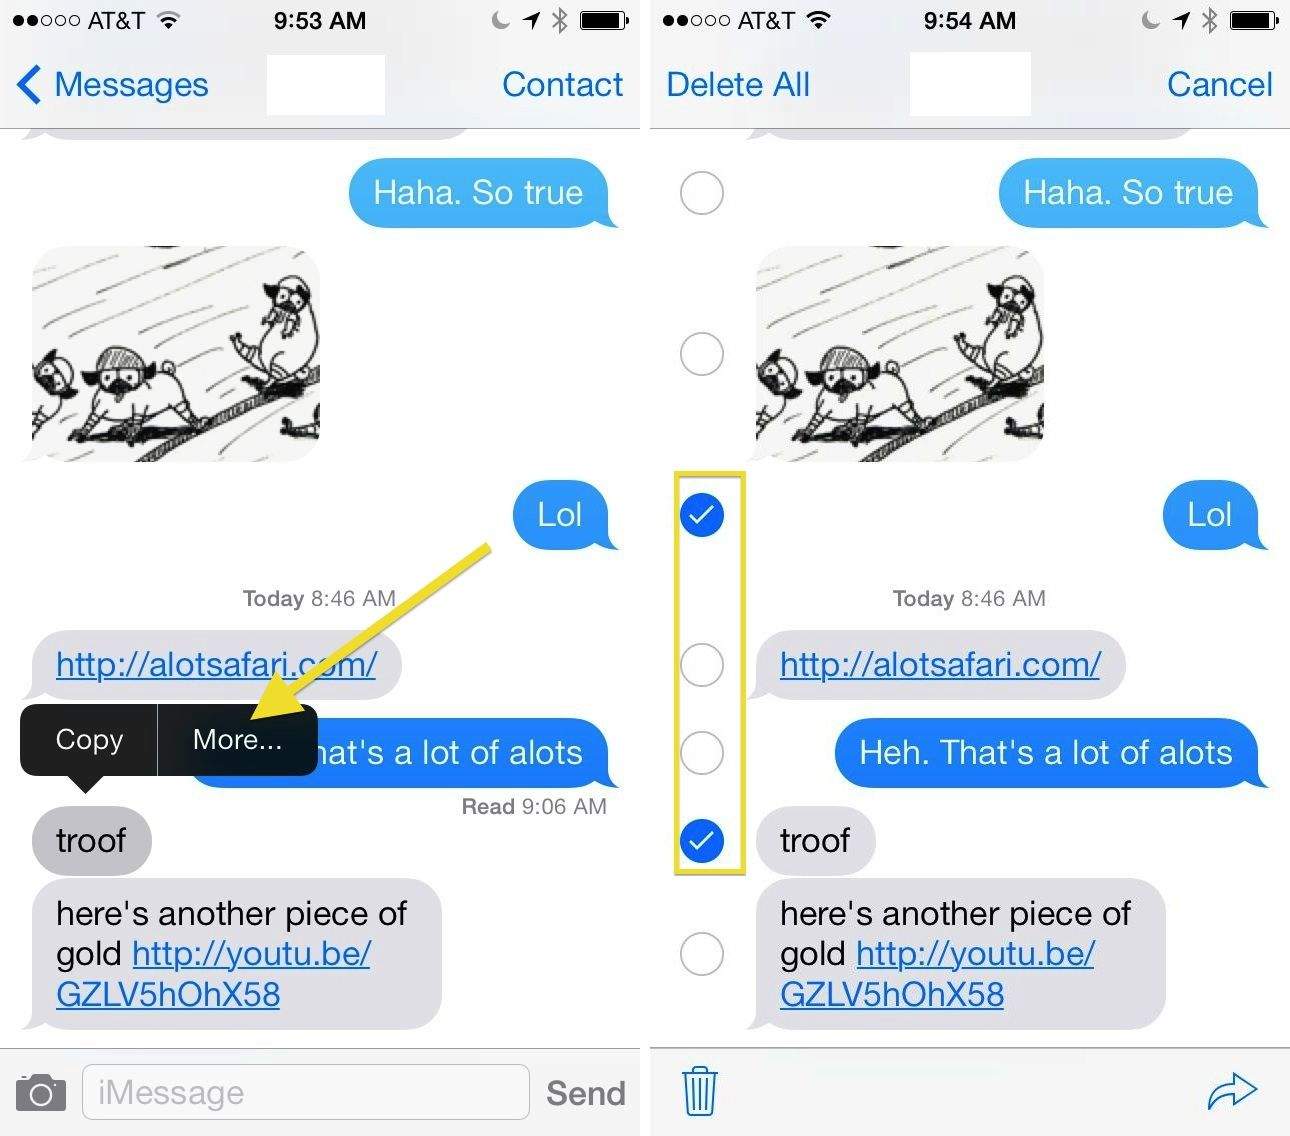 How To Delete Text Messages From Your iPhone In iOS 7 [iOS ...